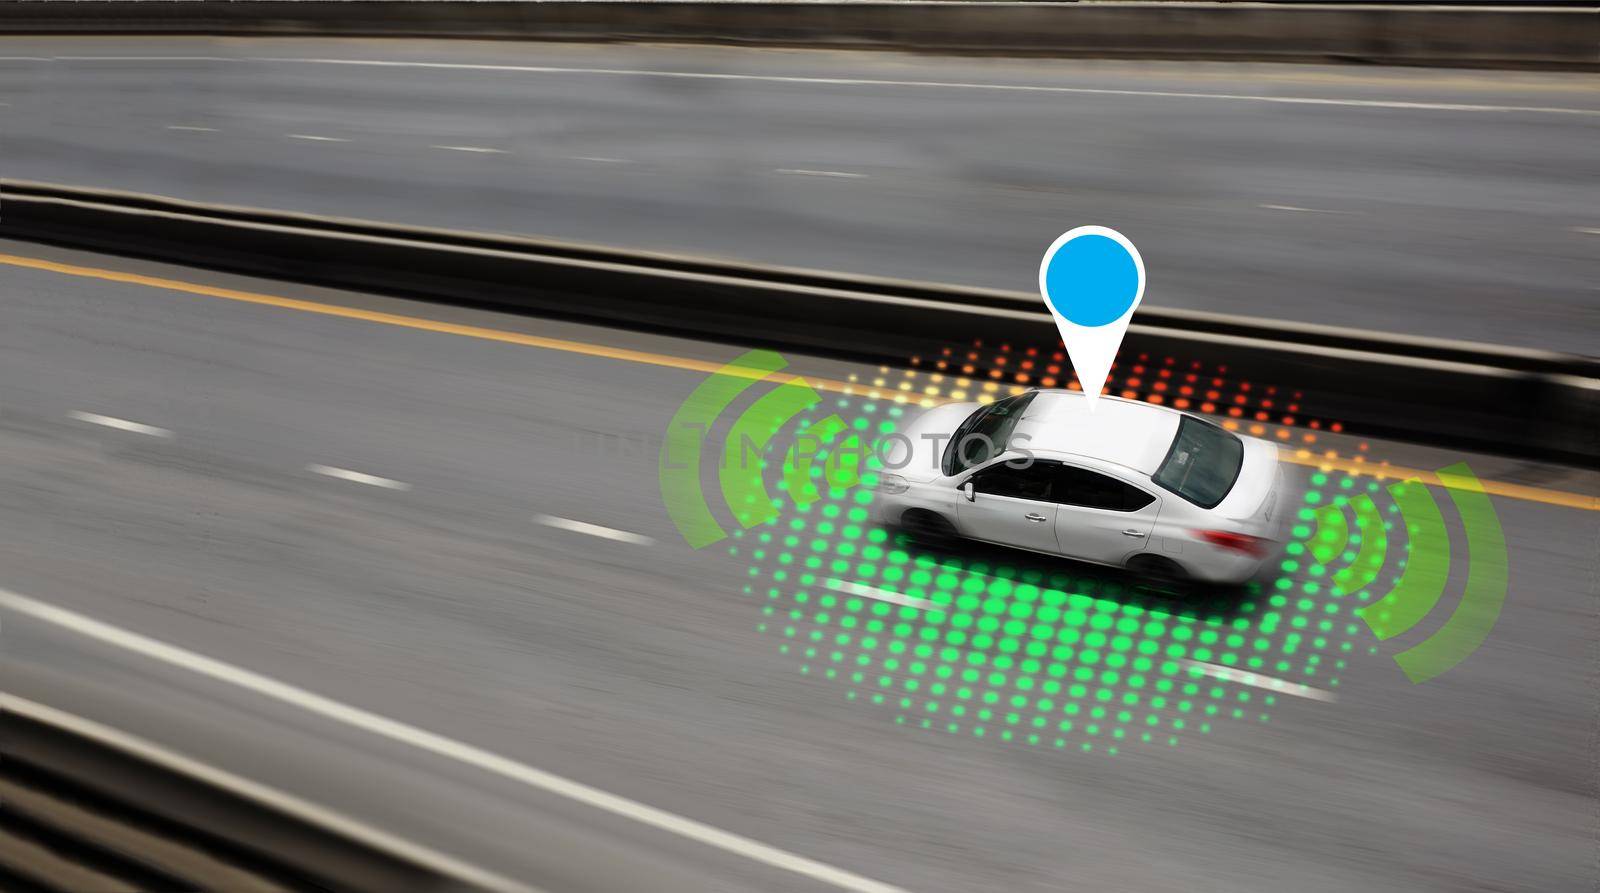 Autonomous self-driving car mode vehicle on the road with graphic sensor signal.